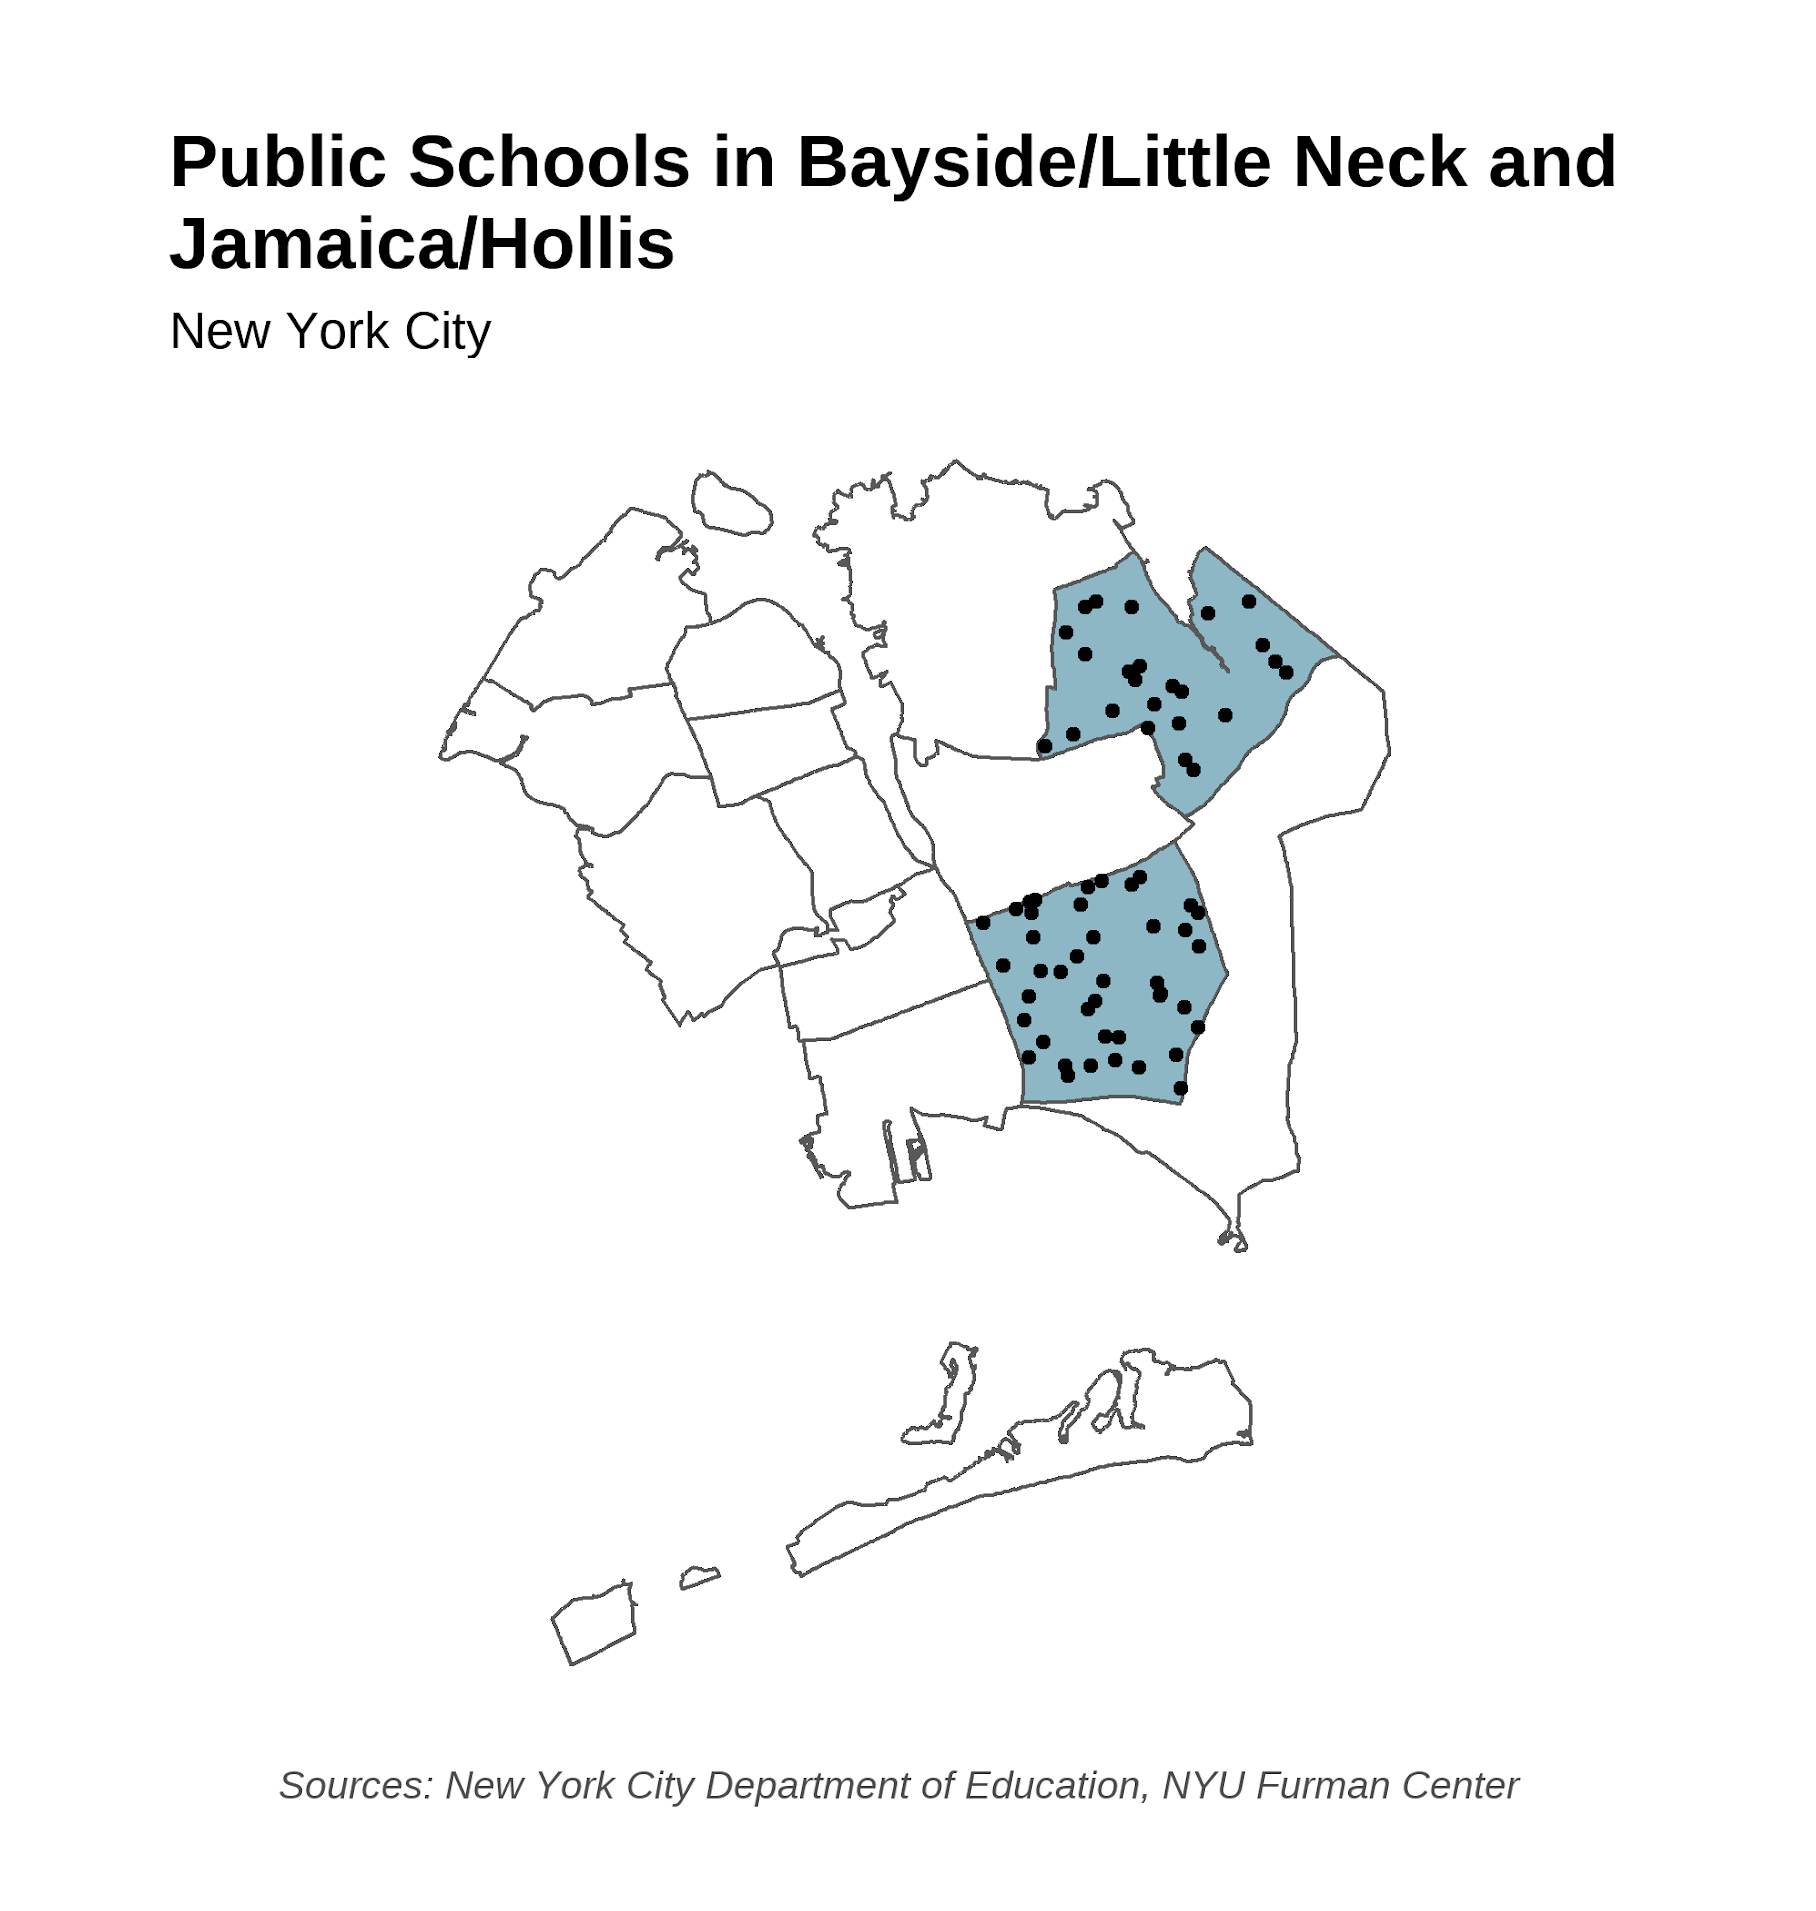 An outline map of public schools in Bayside/Little Neck and Jamaica/Hollis.